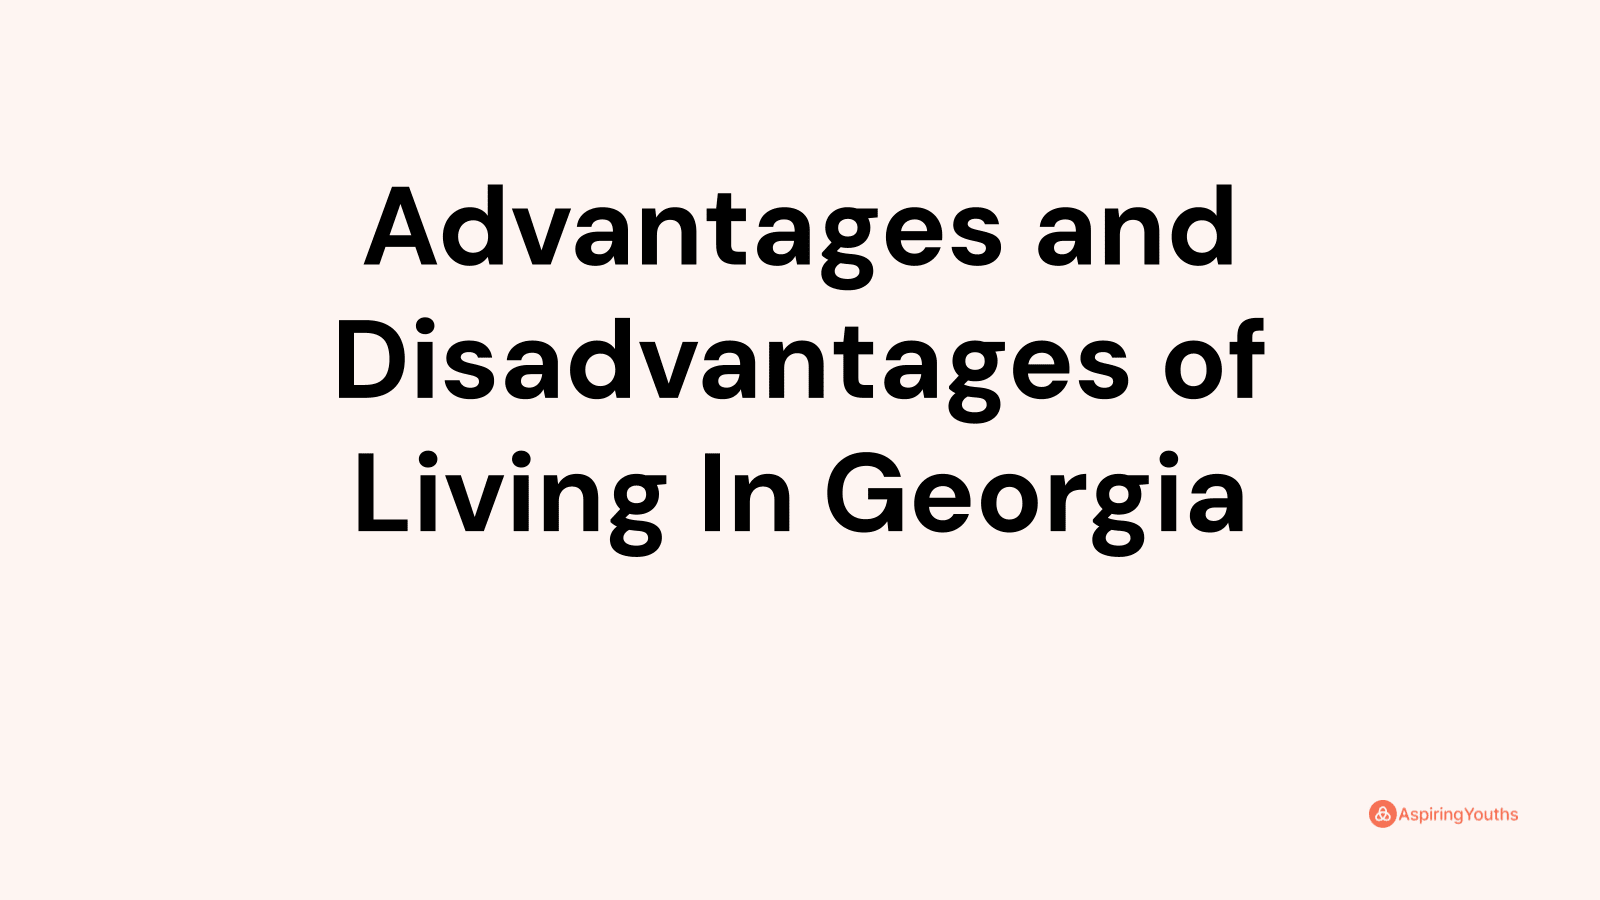 Advantages and disadvantages of Living In Georgia